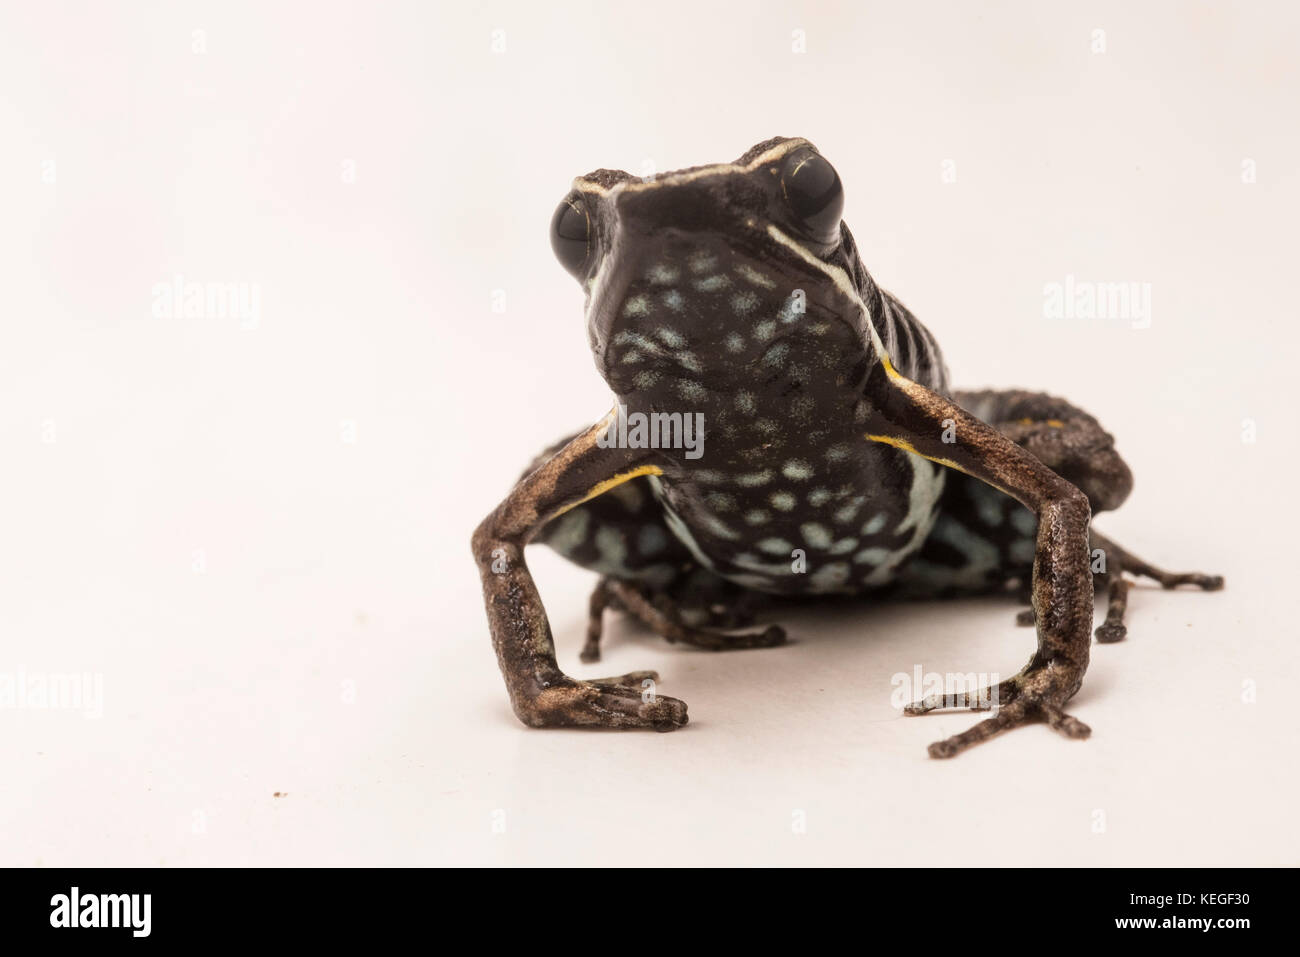 A small species of Poison frog from Peru, not as colorful as some of its close relatives it still has intricate patterns and spots. Stock Photo